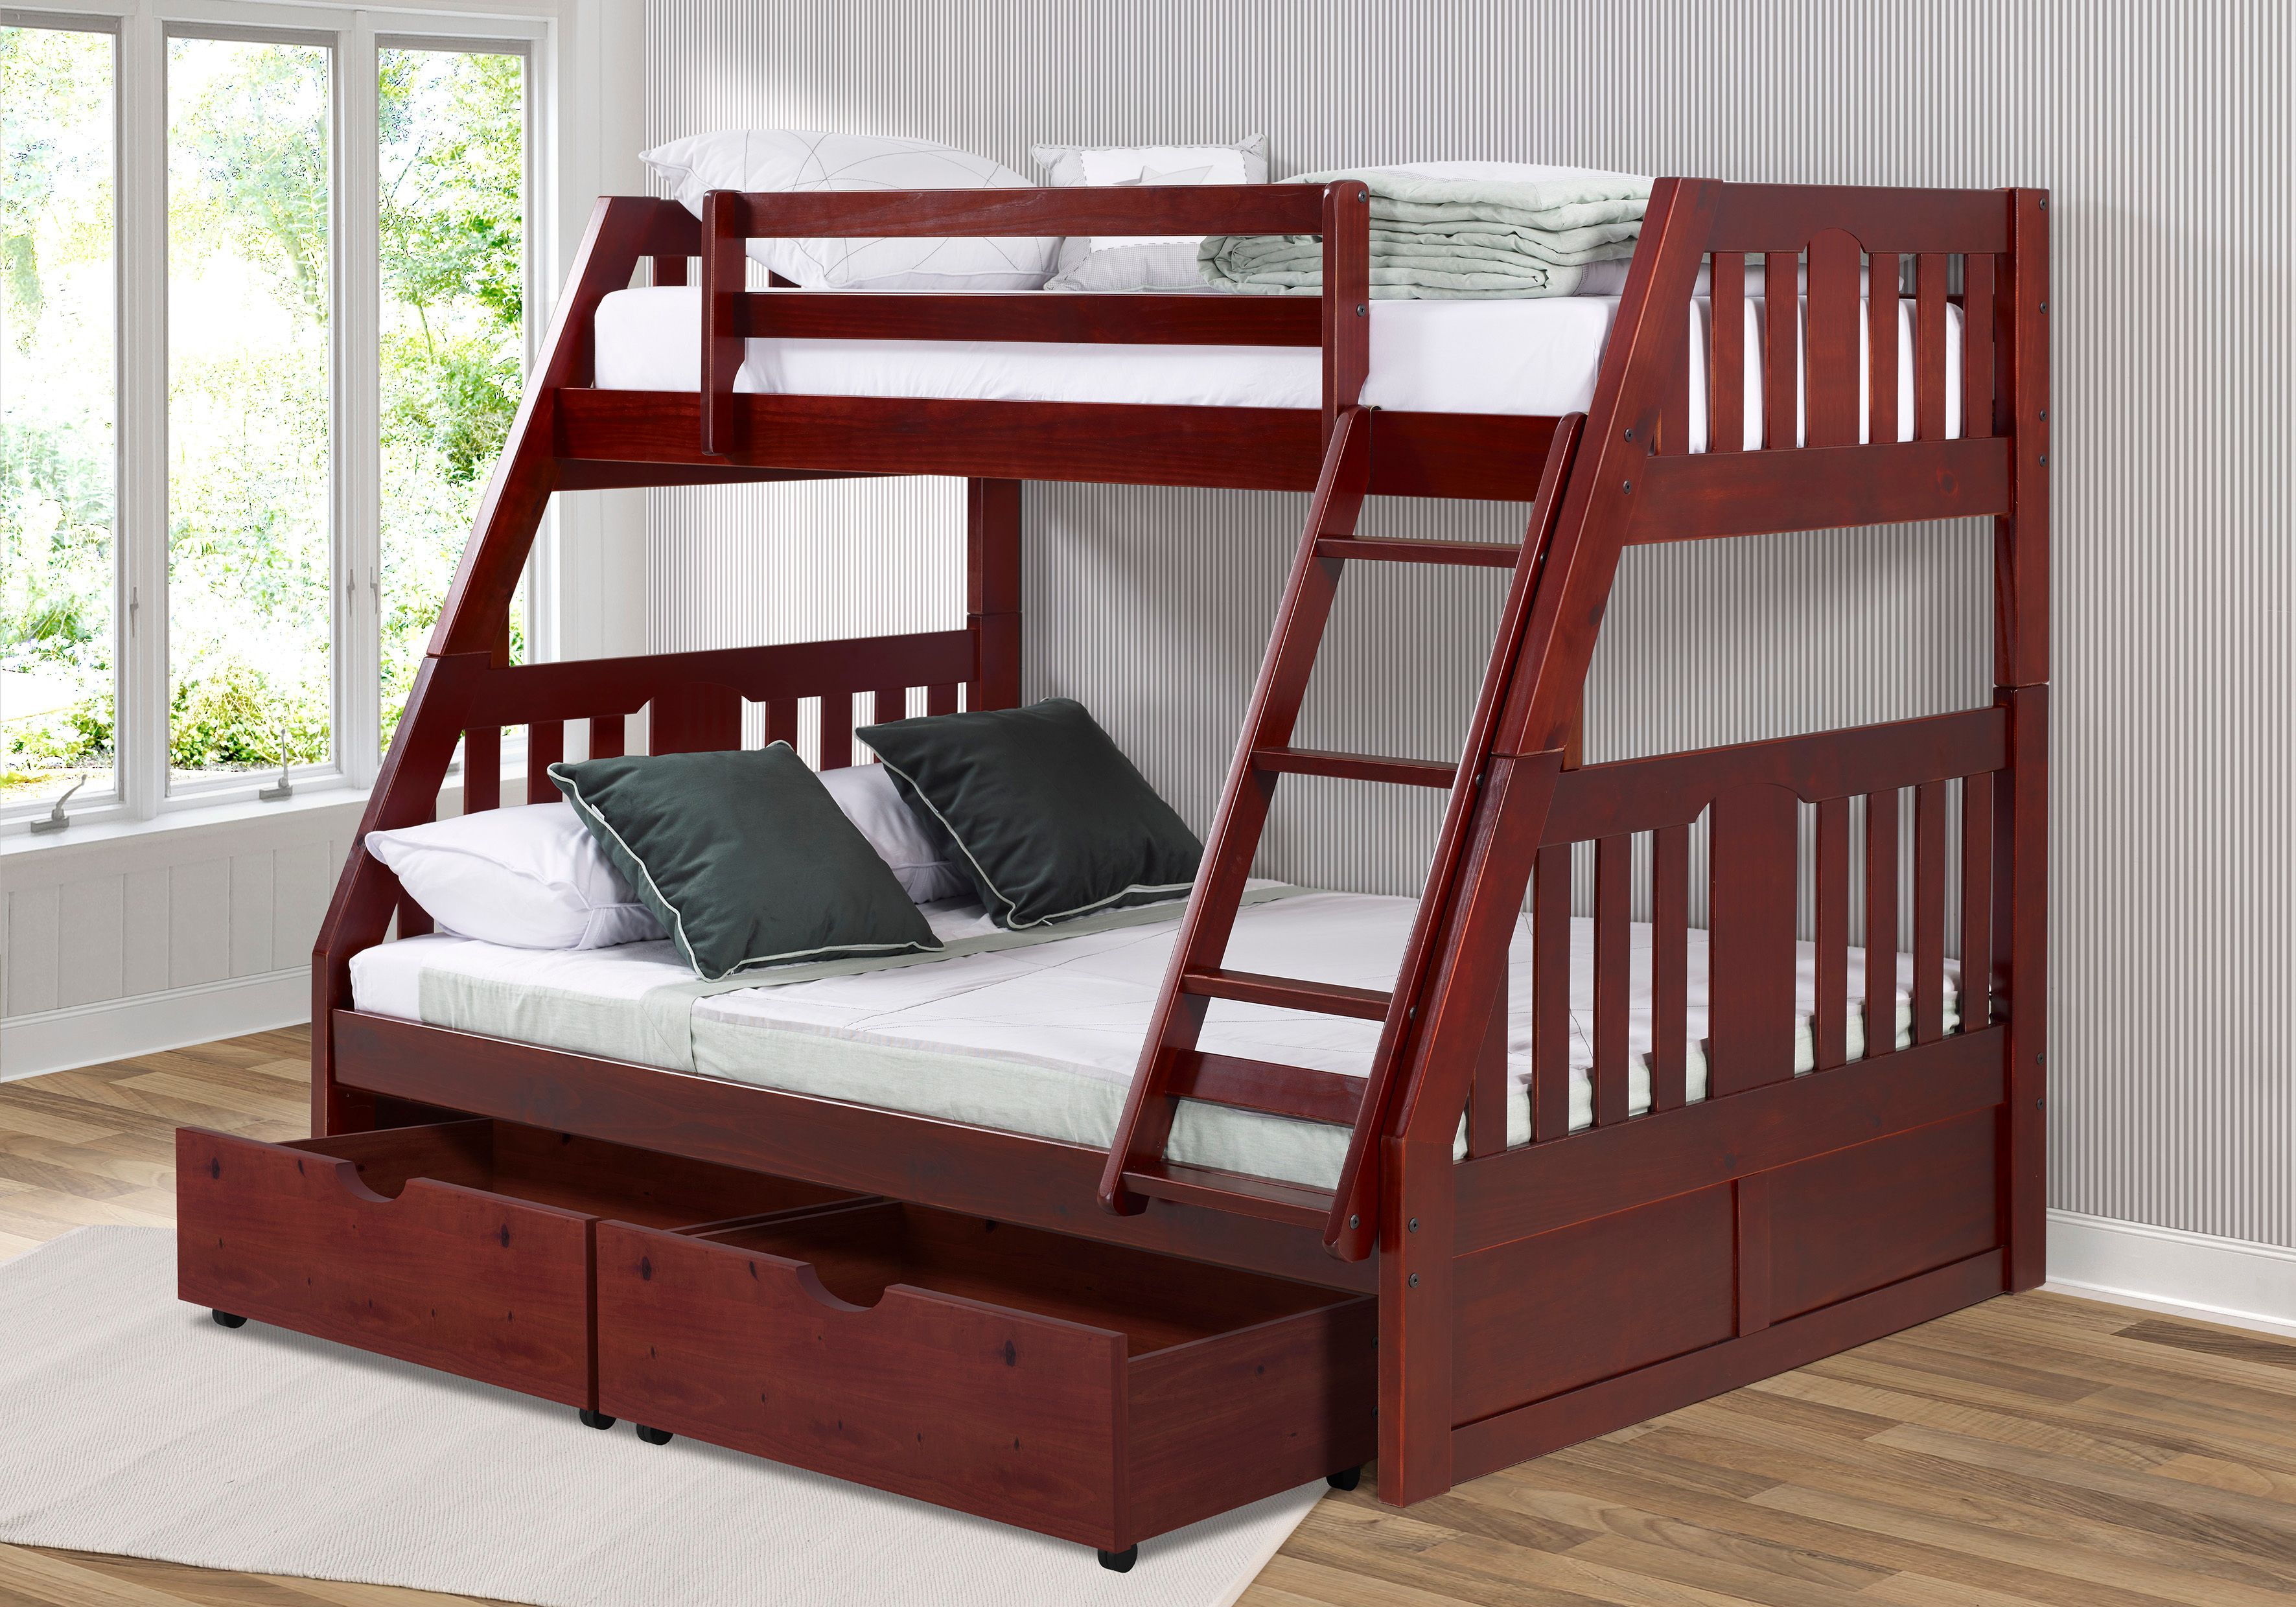 Donco Trading Company Merlot Twin Over Full Mission Bunk Bed with Dual Drawers